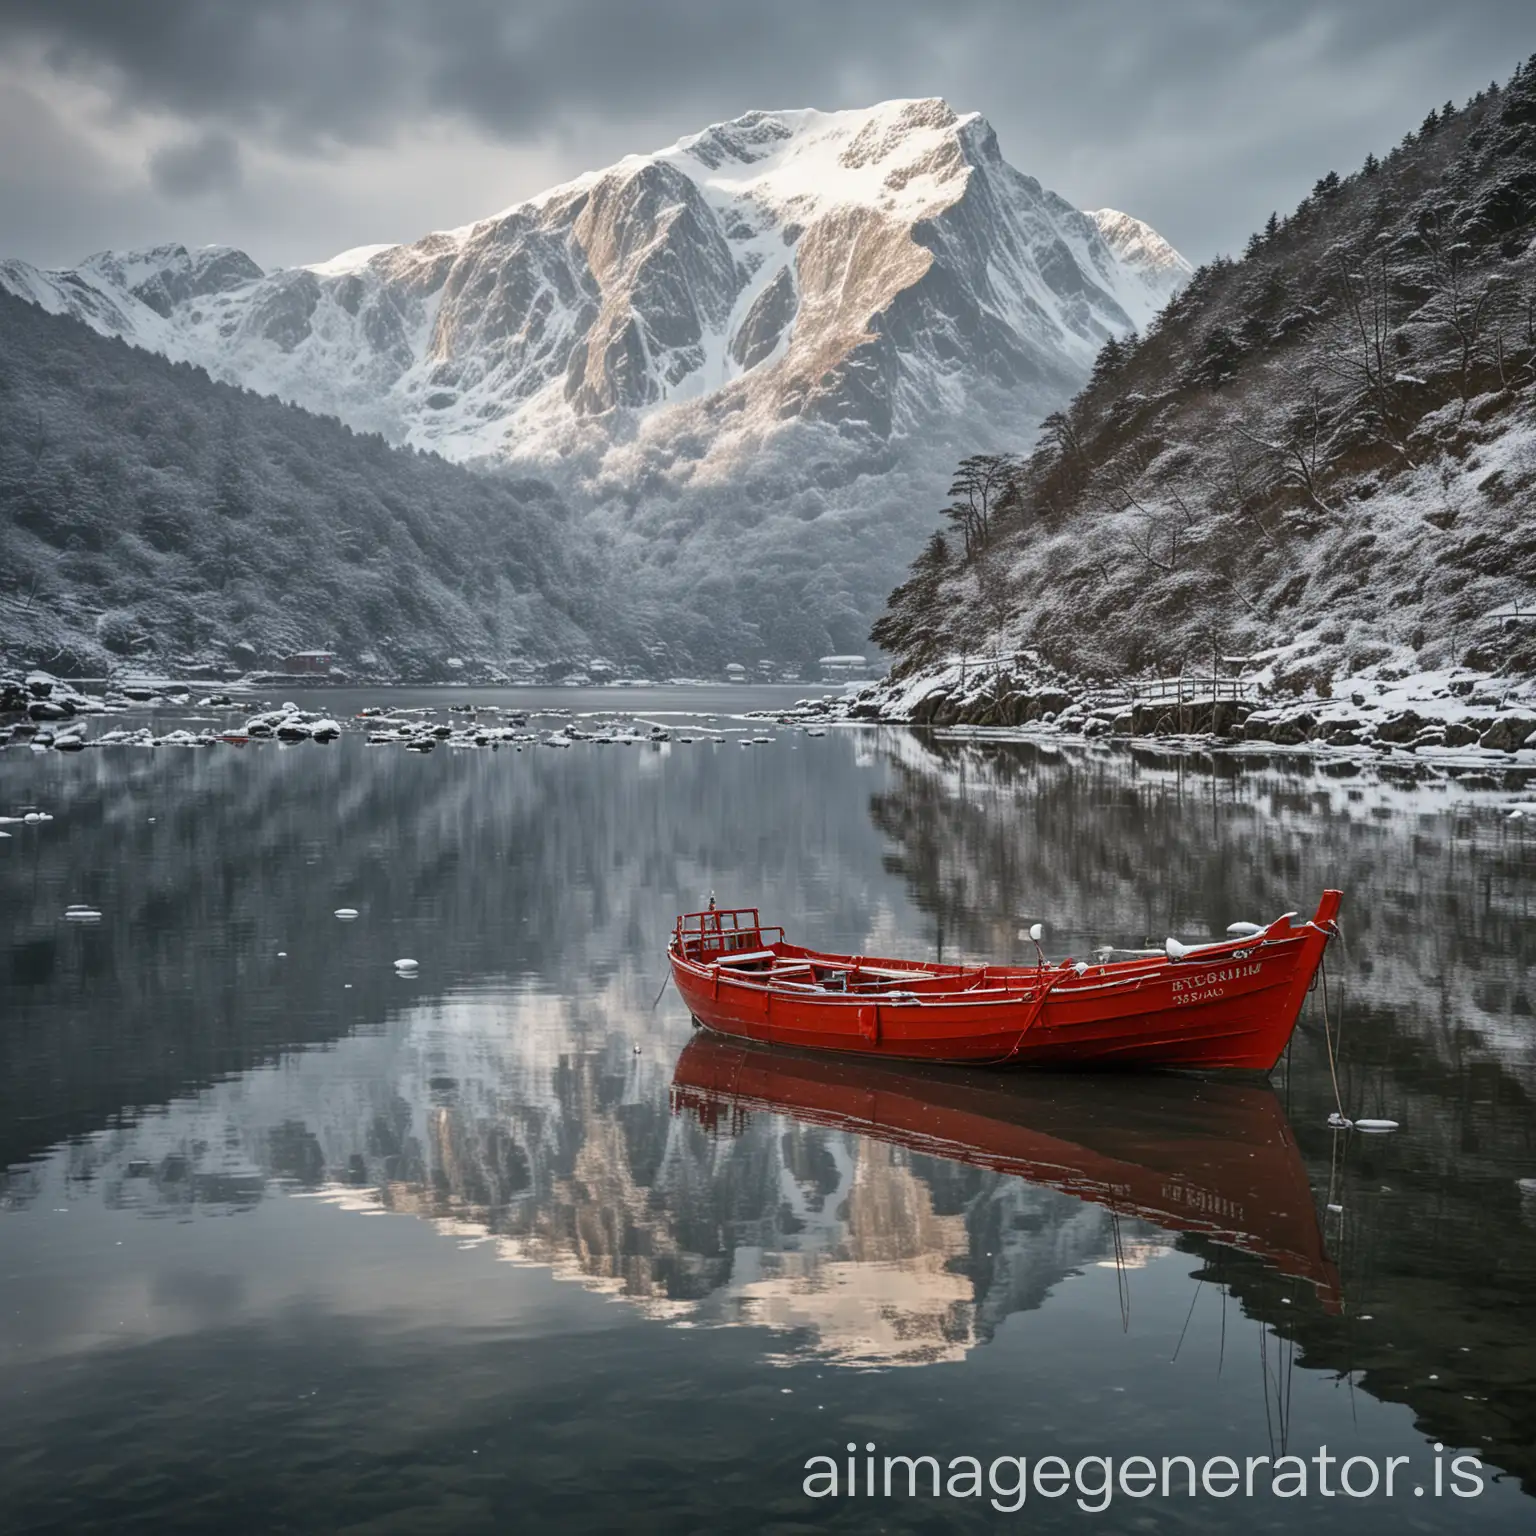 Red-Fishing-Boat-Moored-in-Serene-Fjord-with-SnowCapped-Mountains